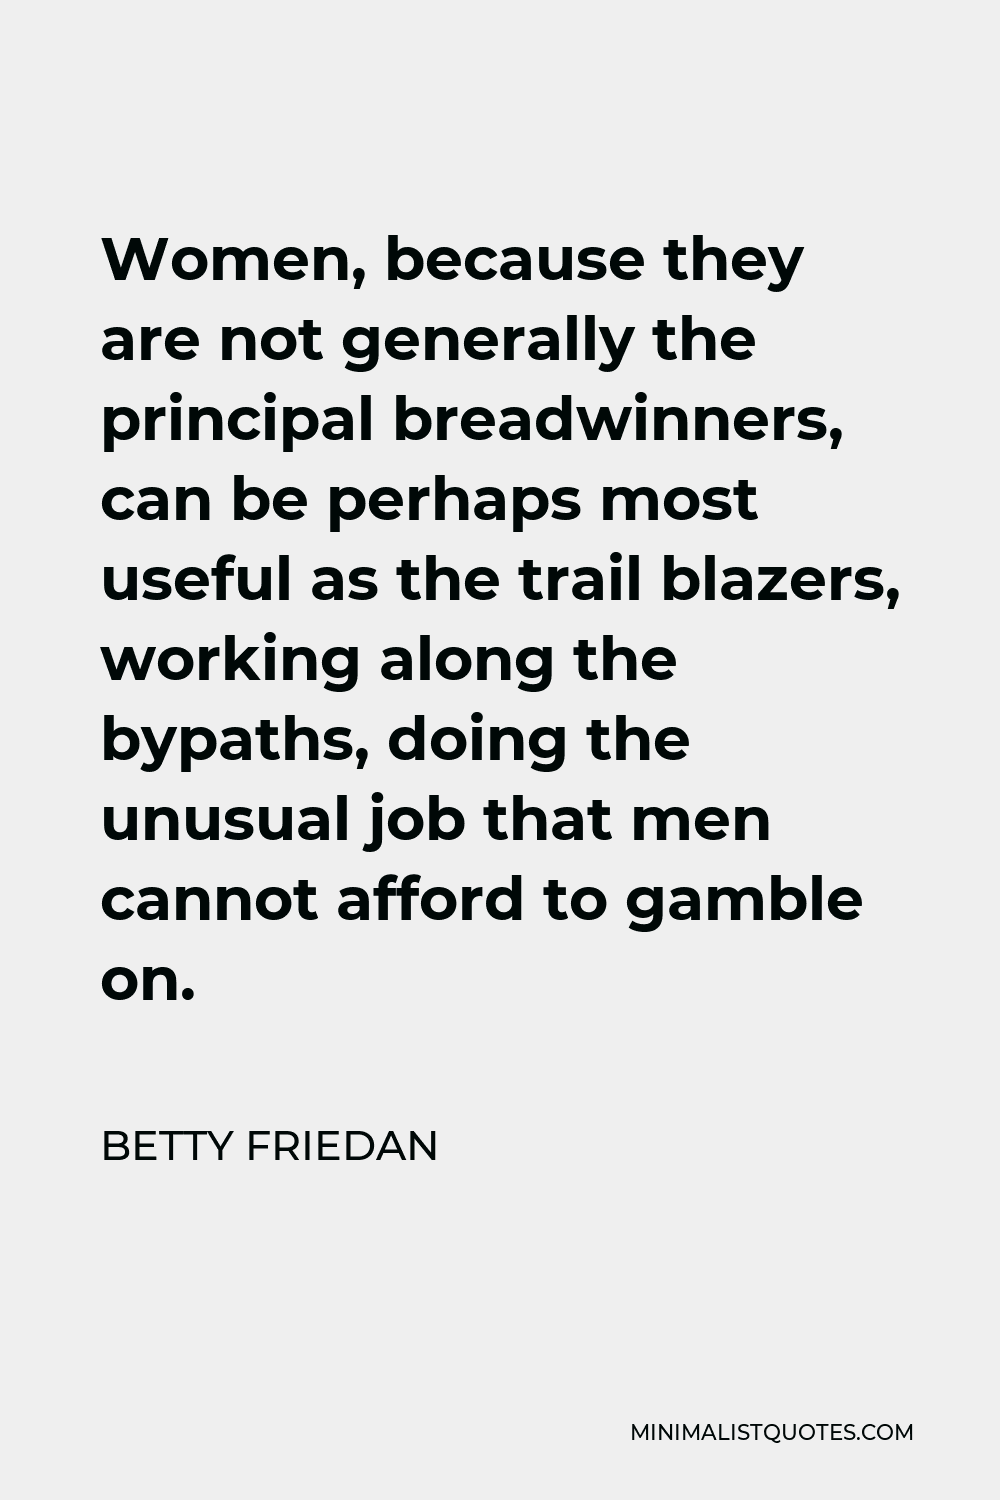 Betty Friedan Quote - Women, because they are not generally the principal breadwinners, can be perhaps most useful as the trail blazers, working along the bypaths, doing the unusual job that men cannot afford to gamble on.